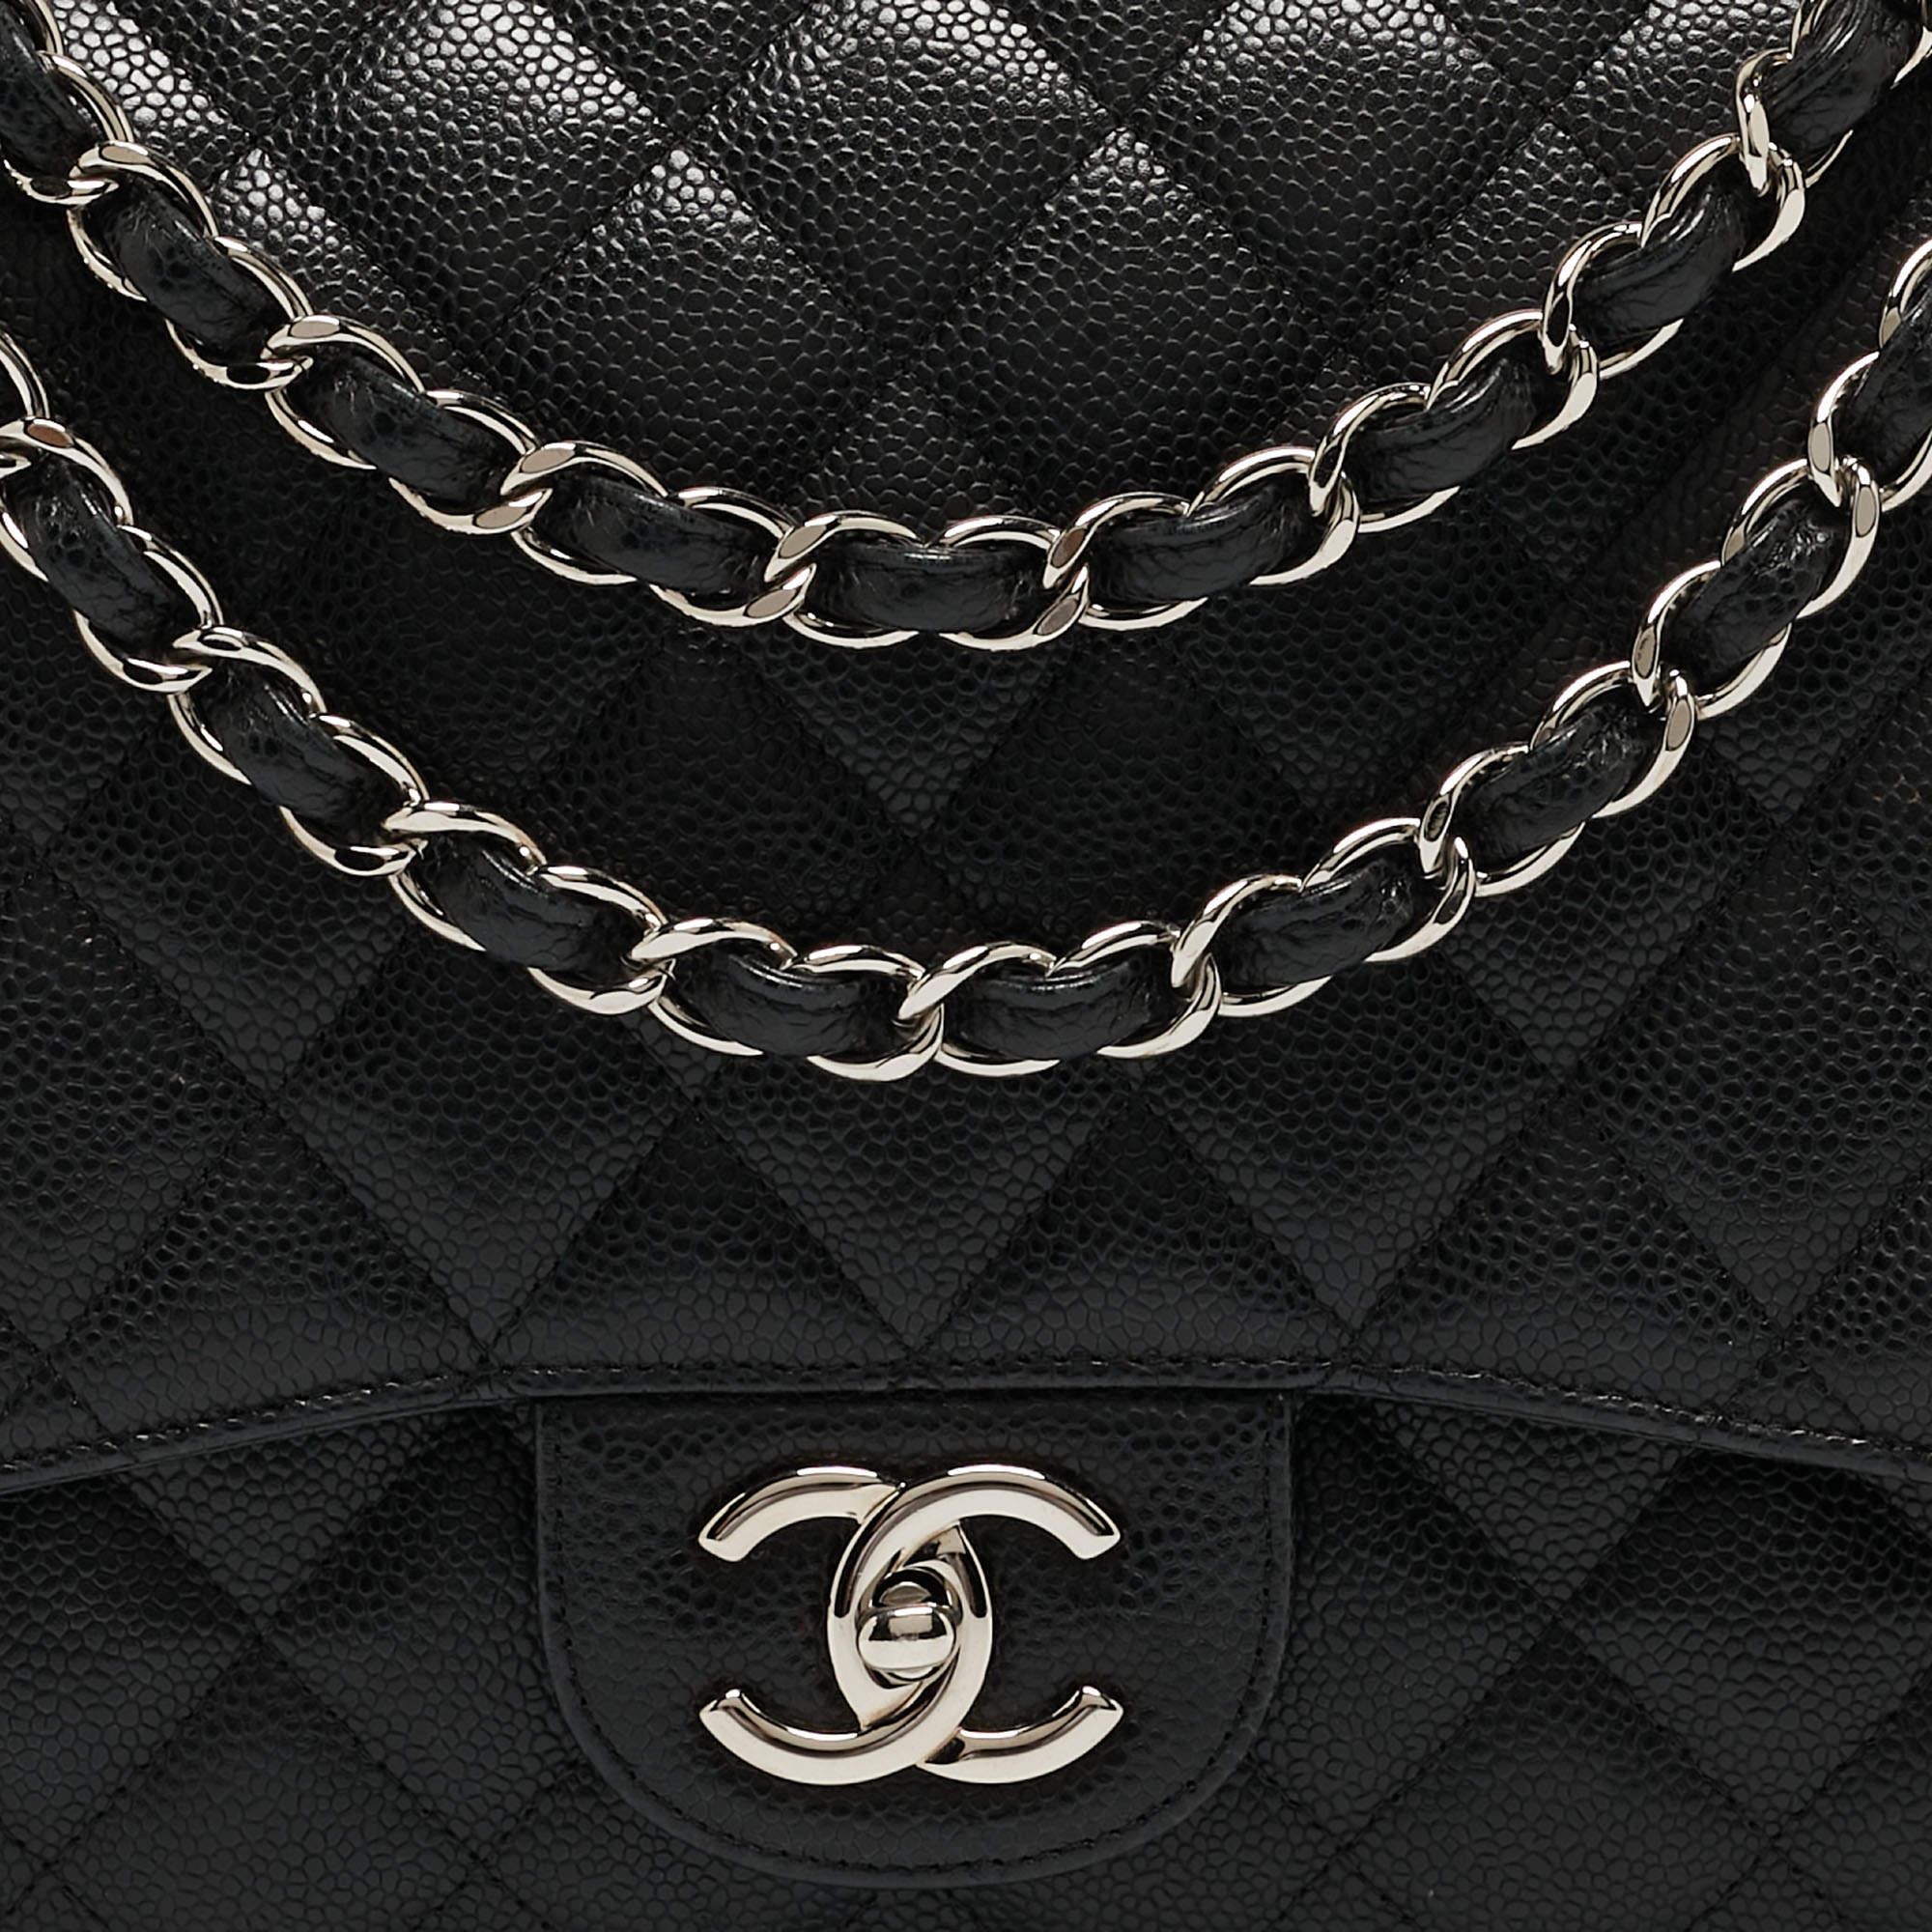 Chanel Black Quilted Caviar Leather Maxi Classic Double Flap Bag For Sale 15